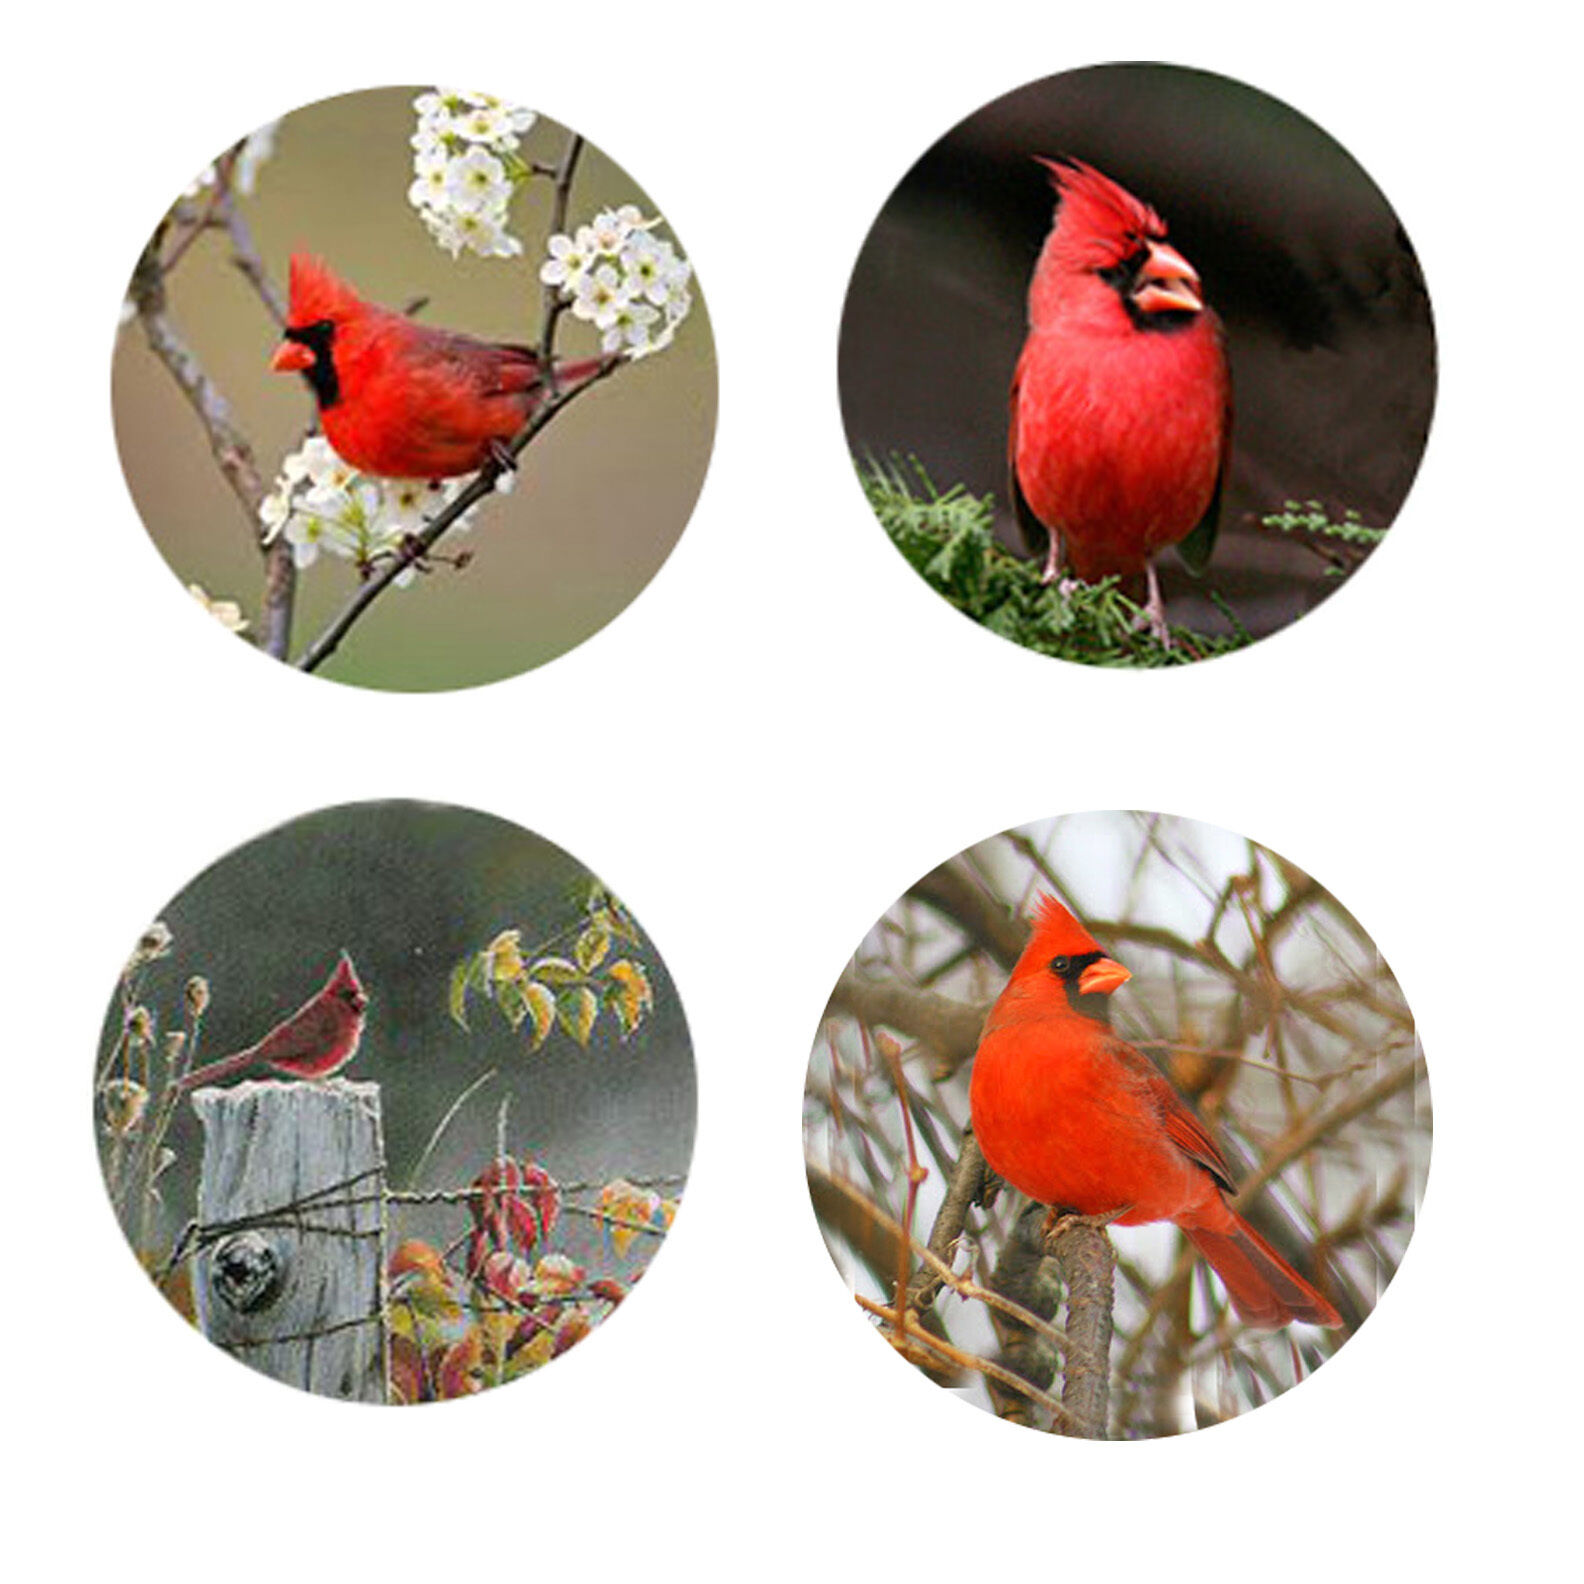 Cardinal Magnets-A    4 Cool Cardinals for your home or collection-A Great Gift